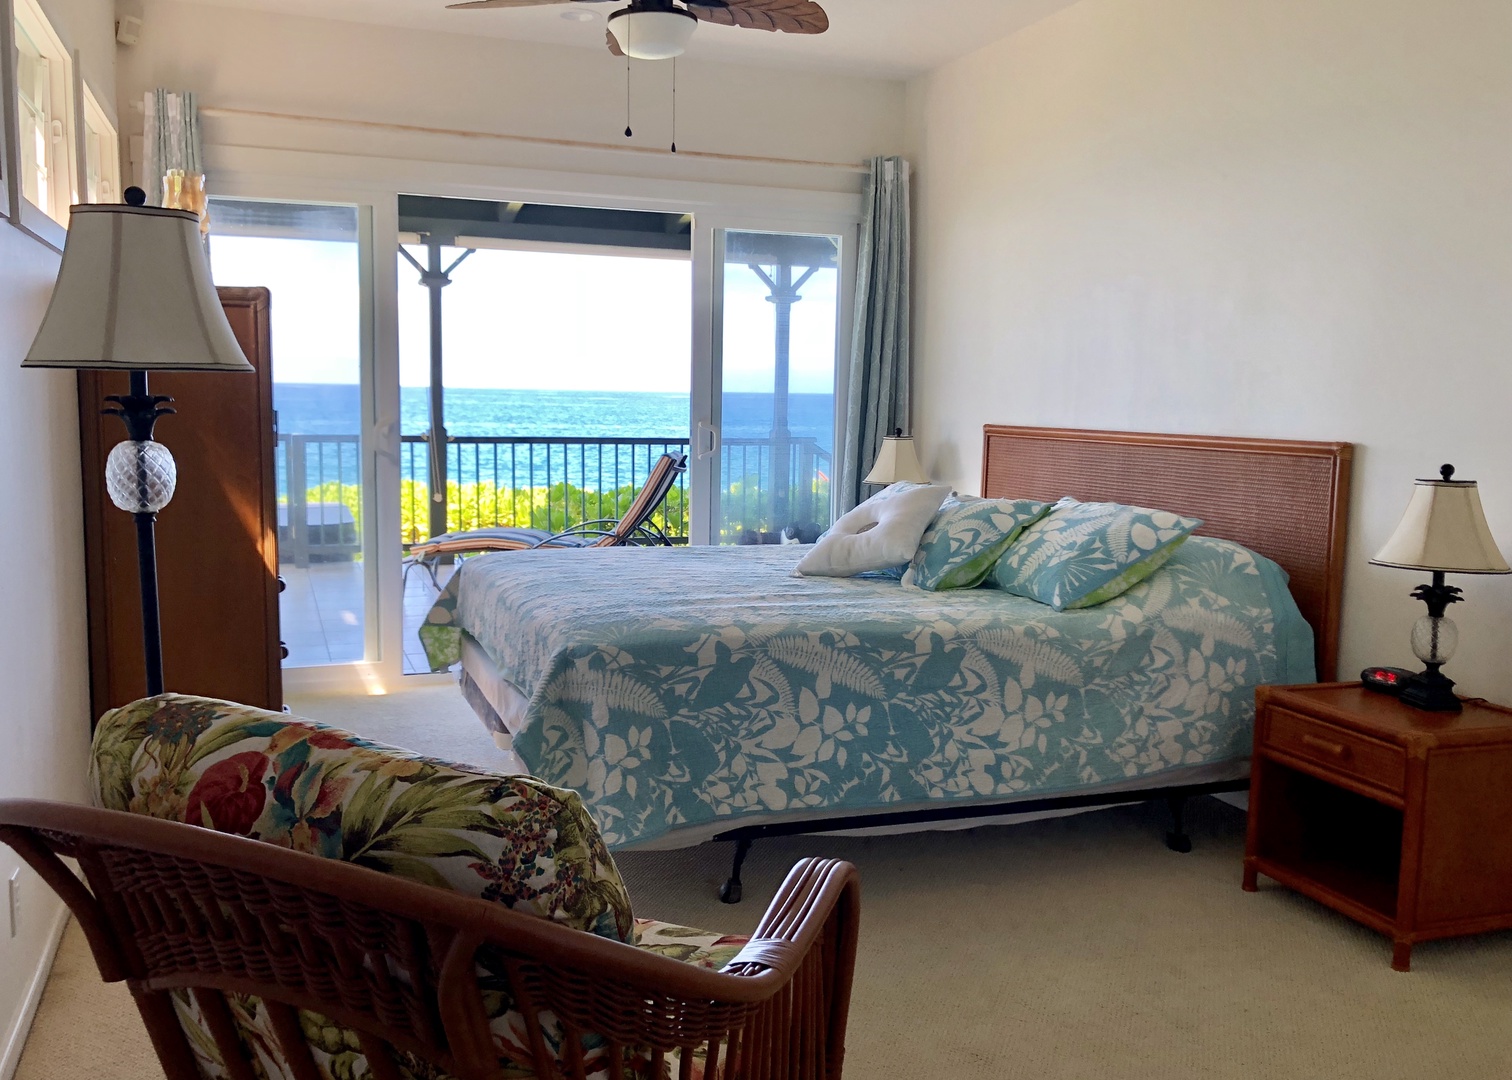 Kailua Kona Vacation Rentals, Hoku'Ea Hale - First floor Primary bedroom with access to the expansive lanai!